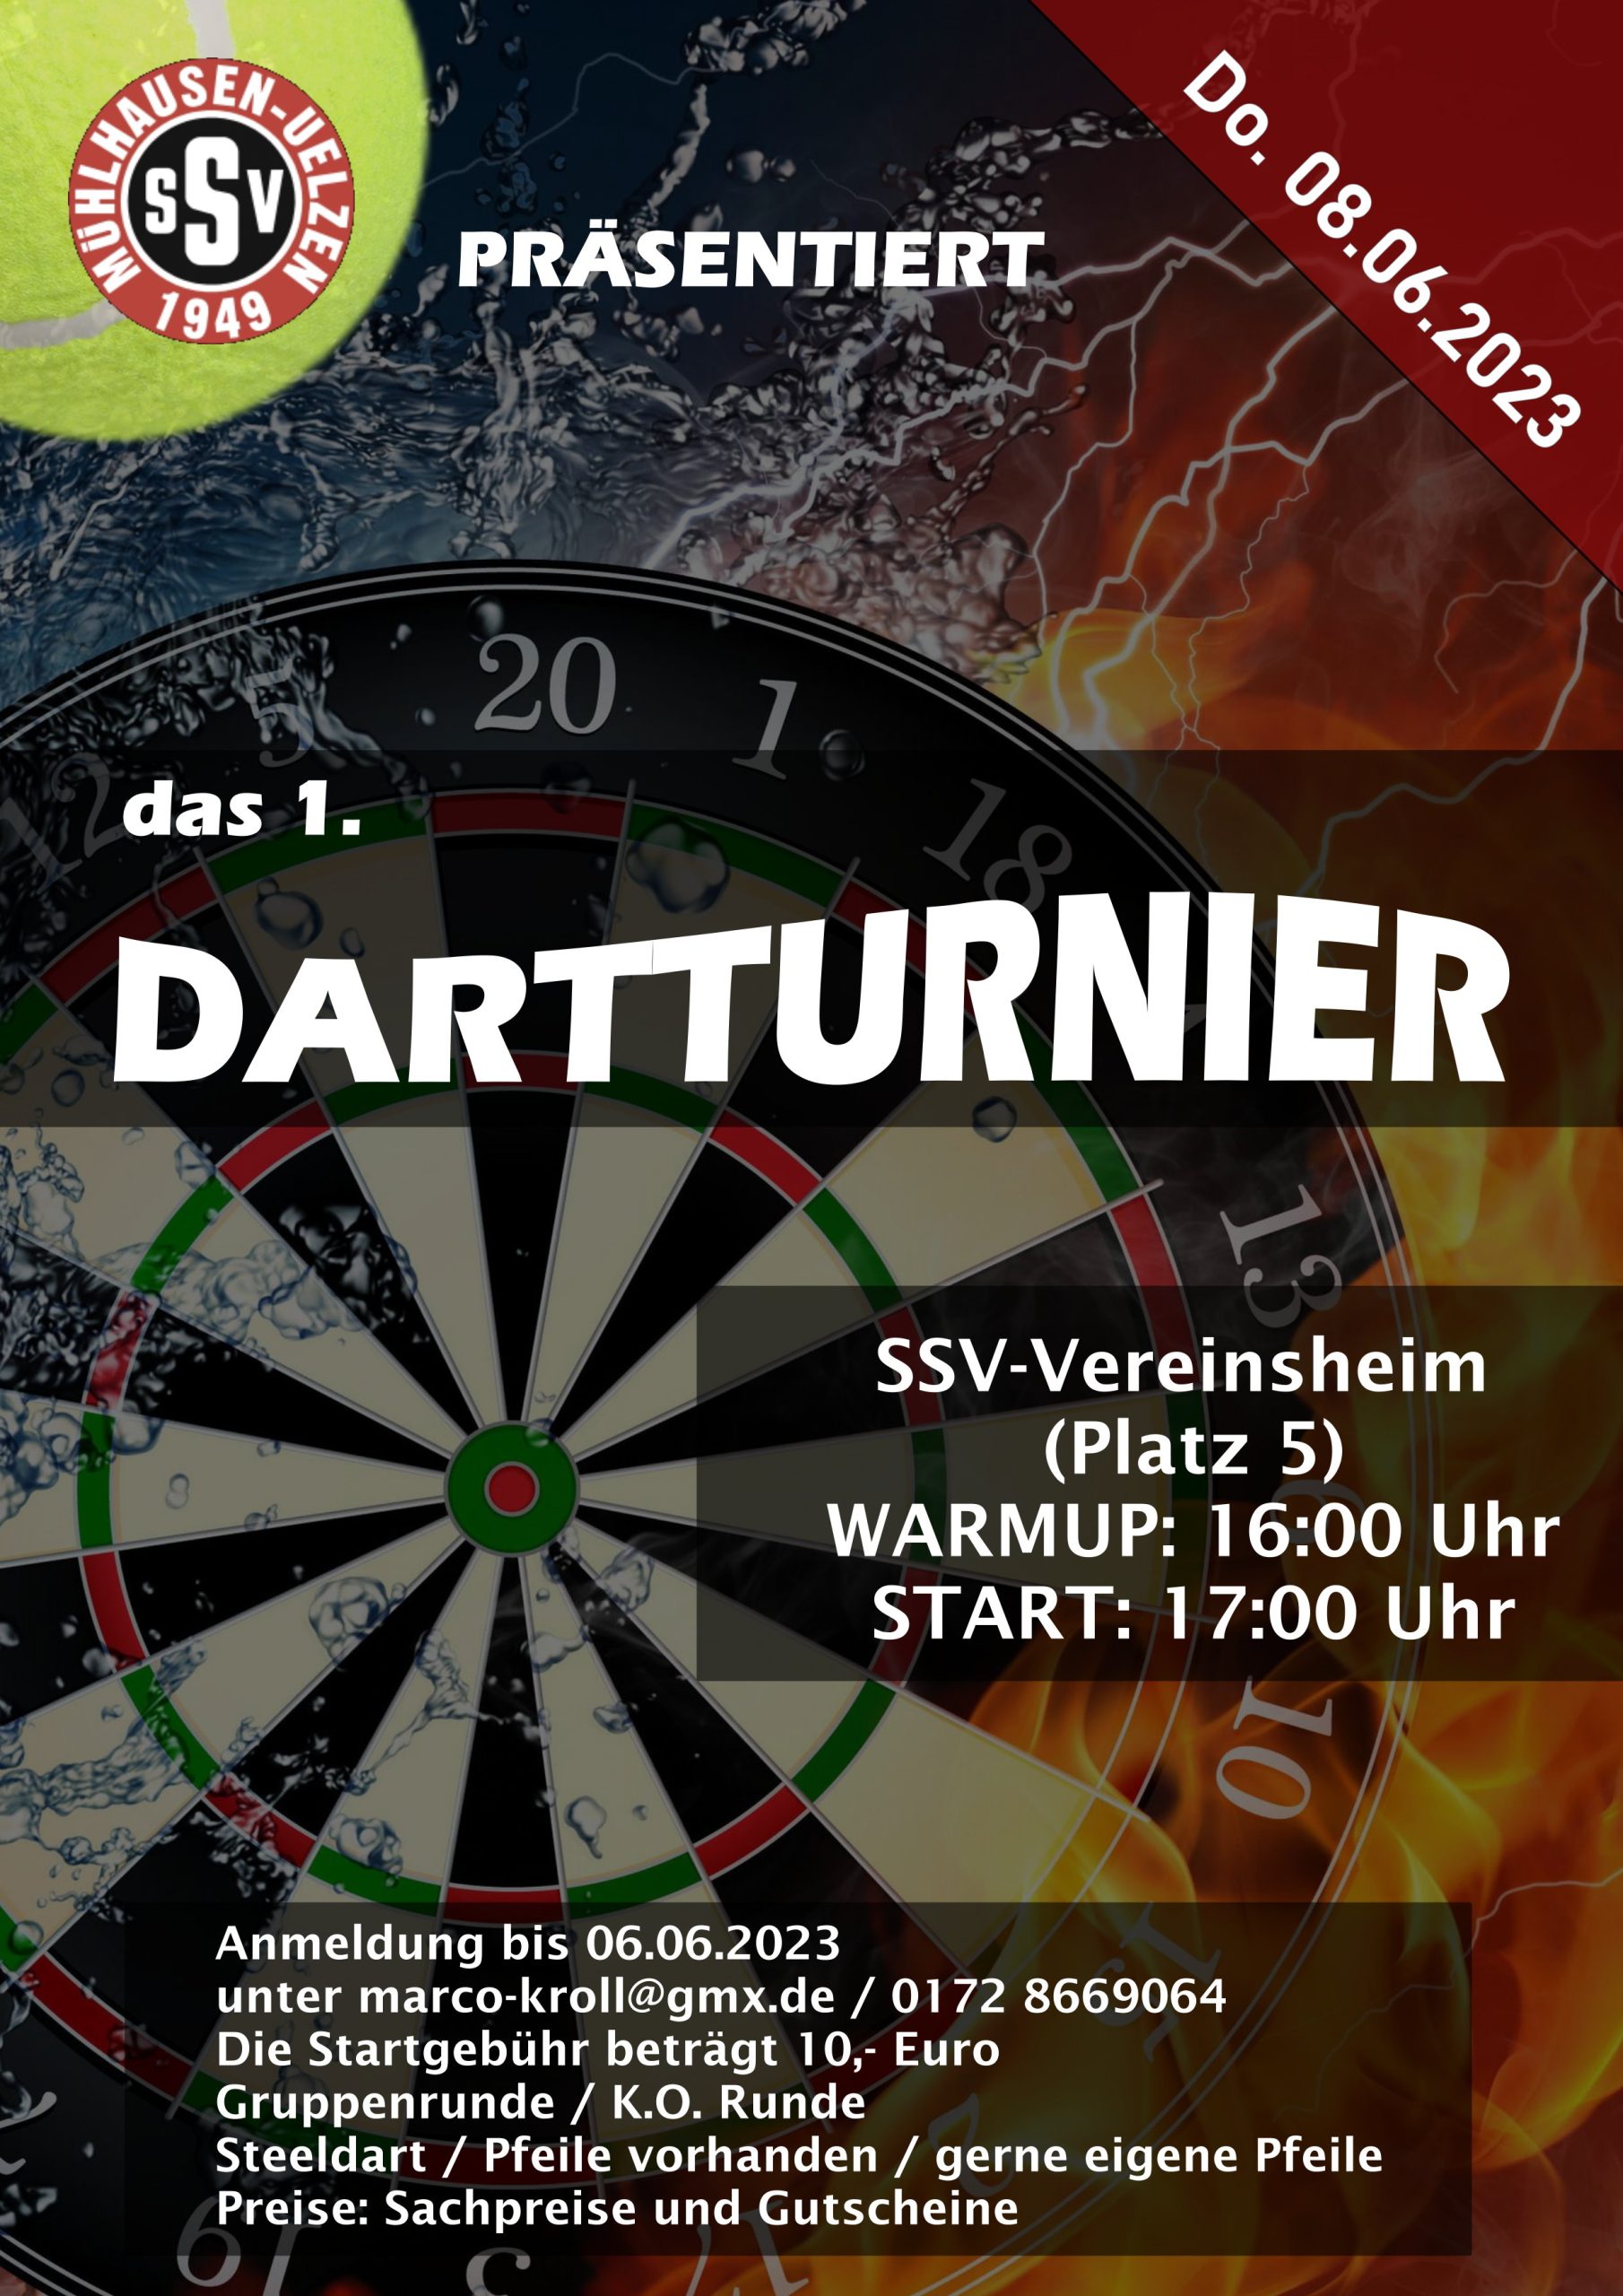 You are currently viewing Dartturnier am Do. 08.06.2023